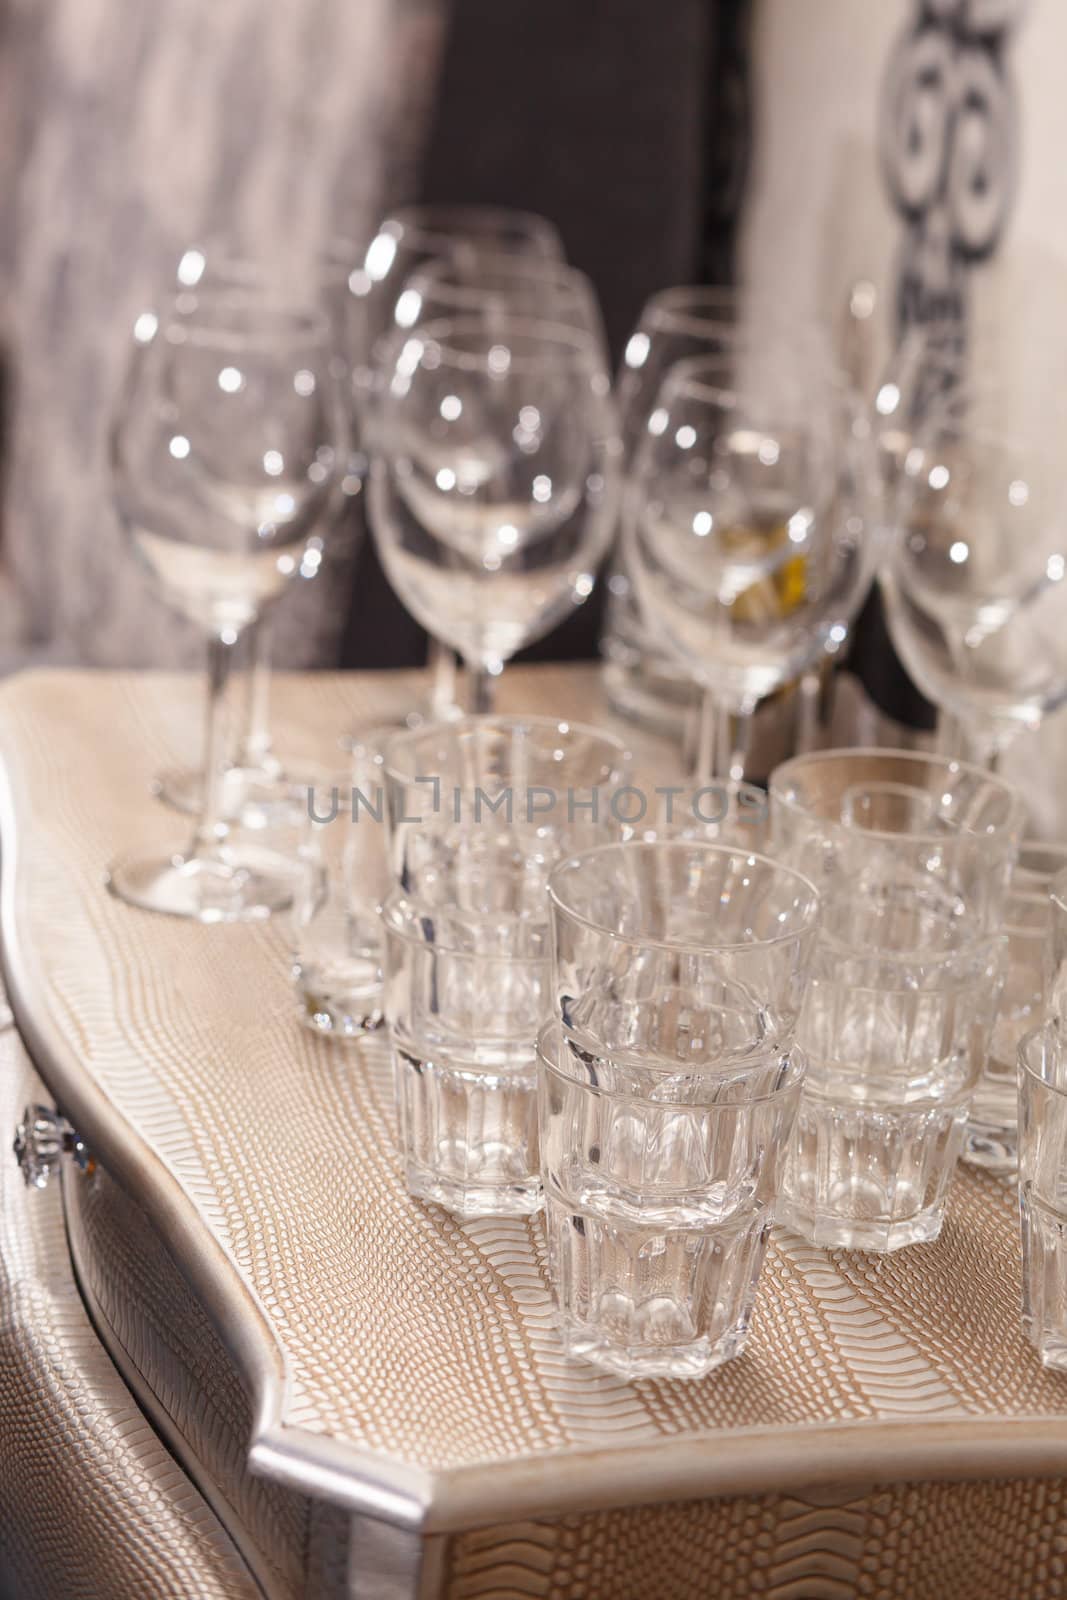 Empty glasses on restaurant table by shebeko